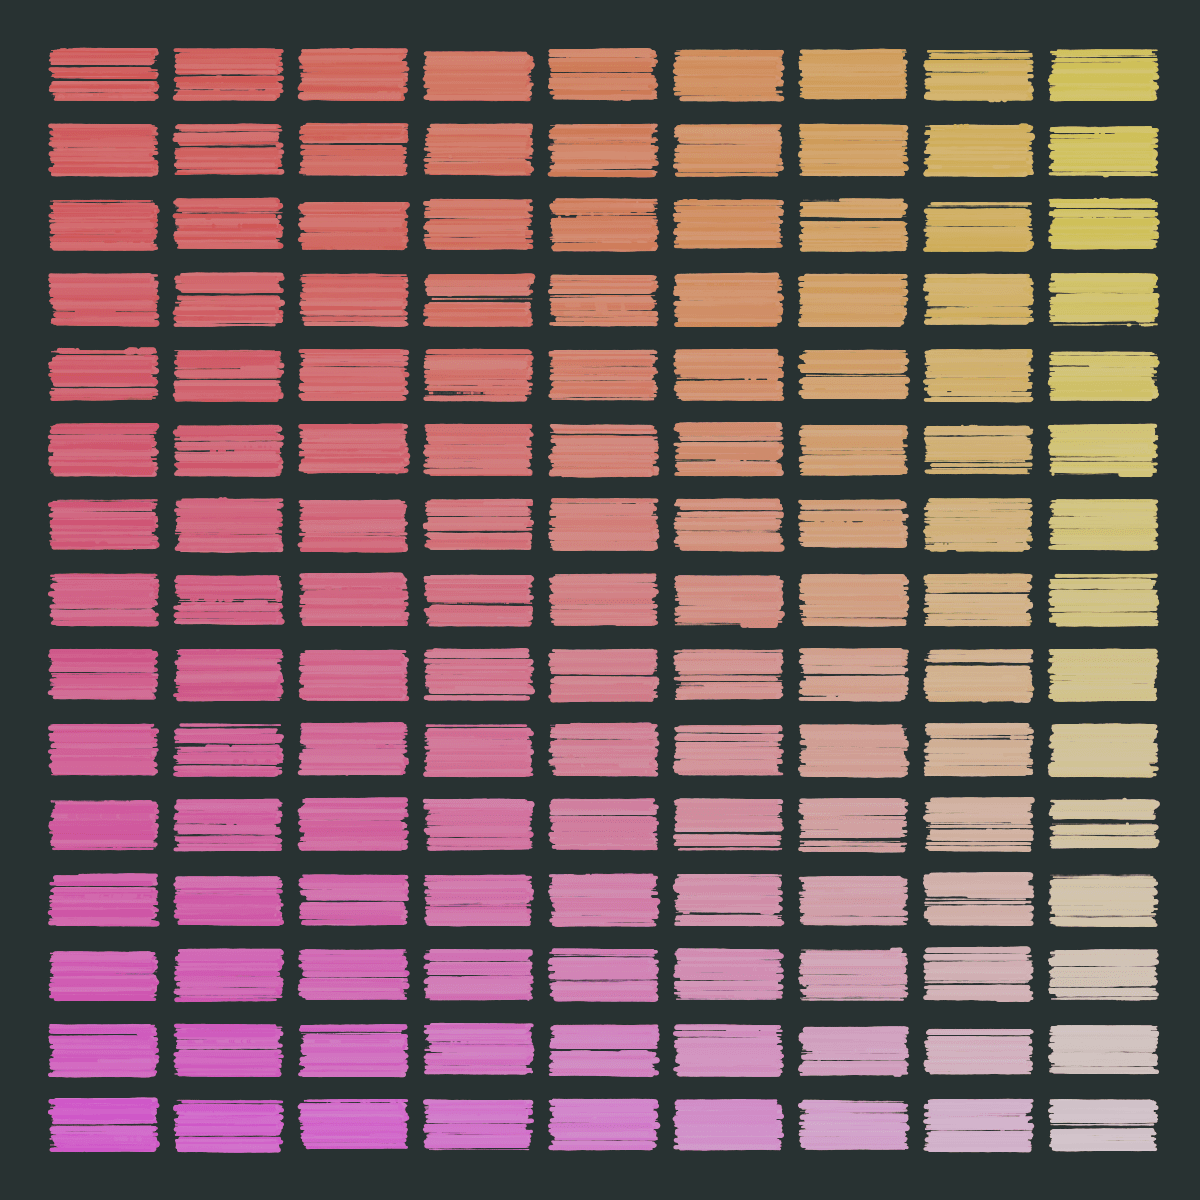 Gradient grid of brush strokes. Red, magenta, and yellow, on a black background